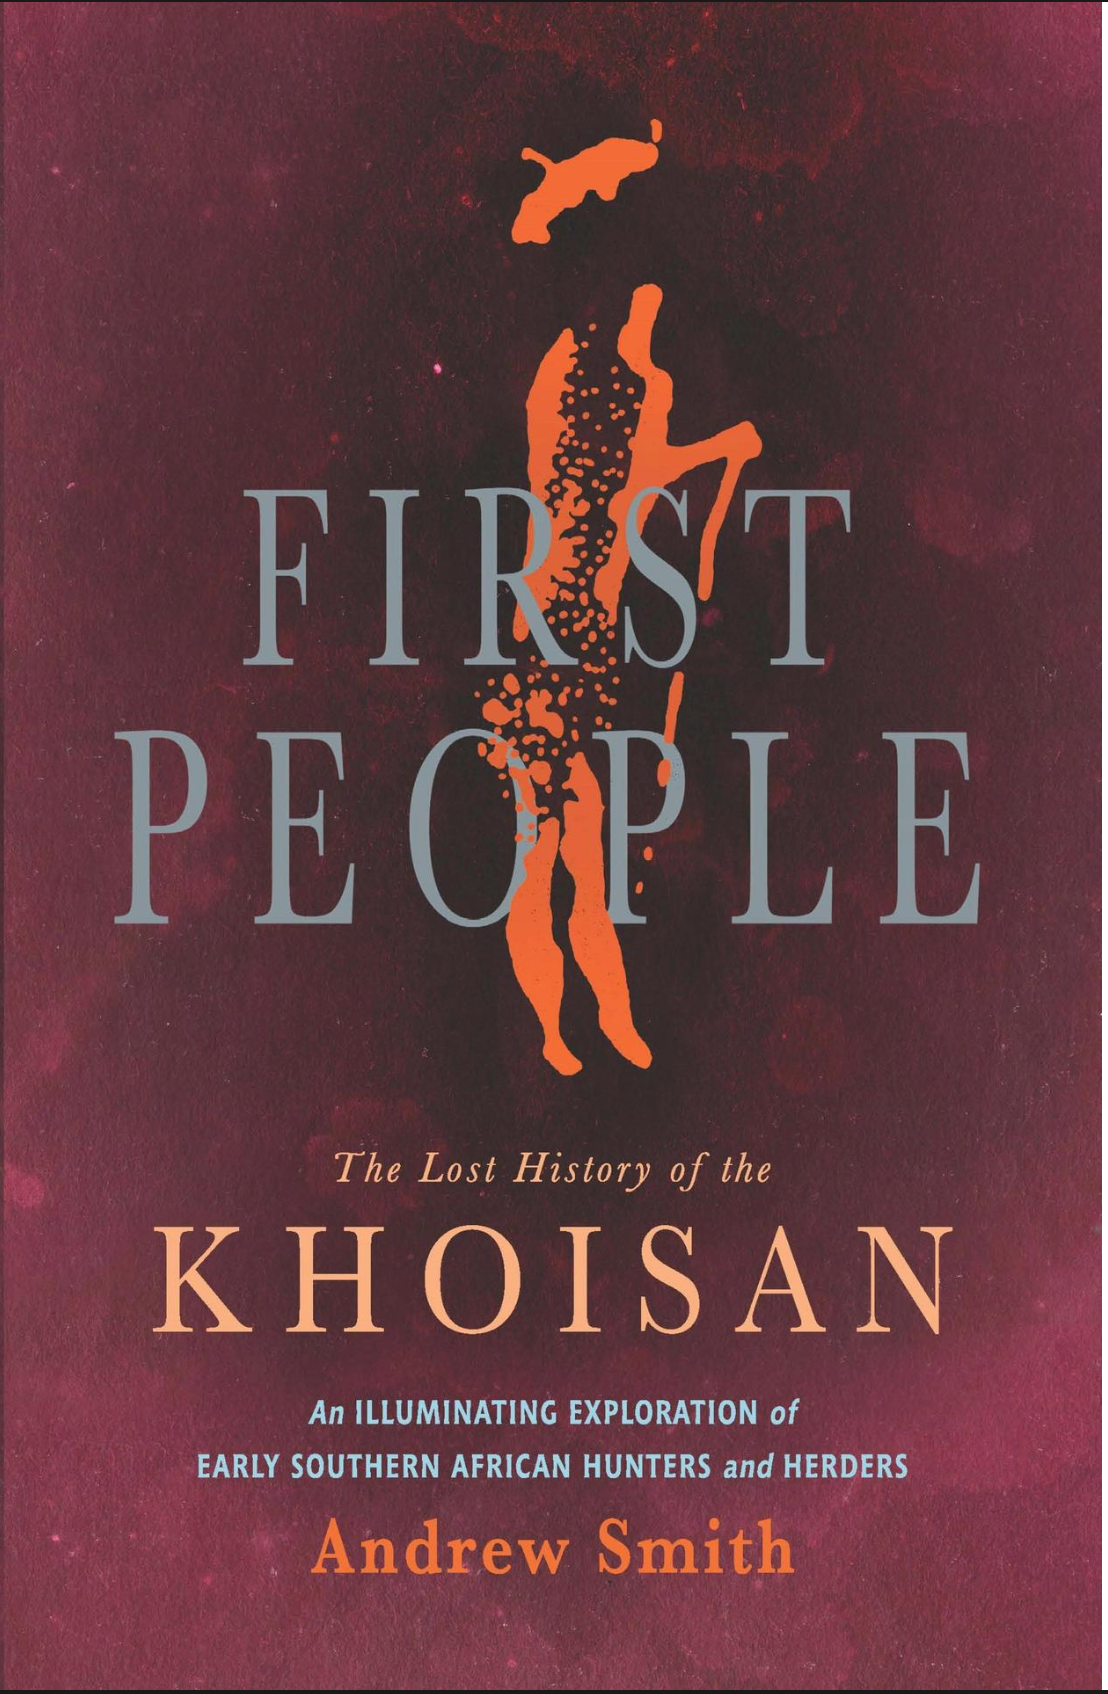 First People